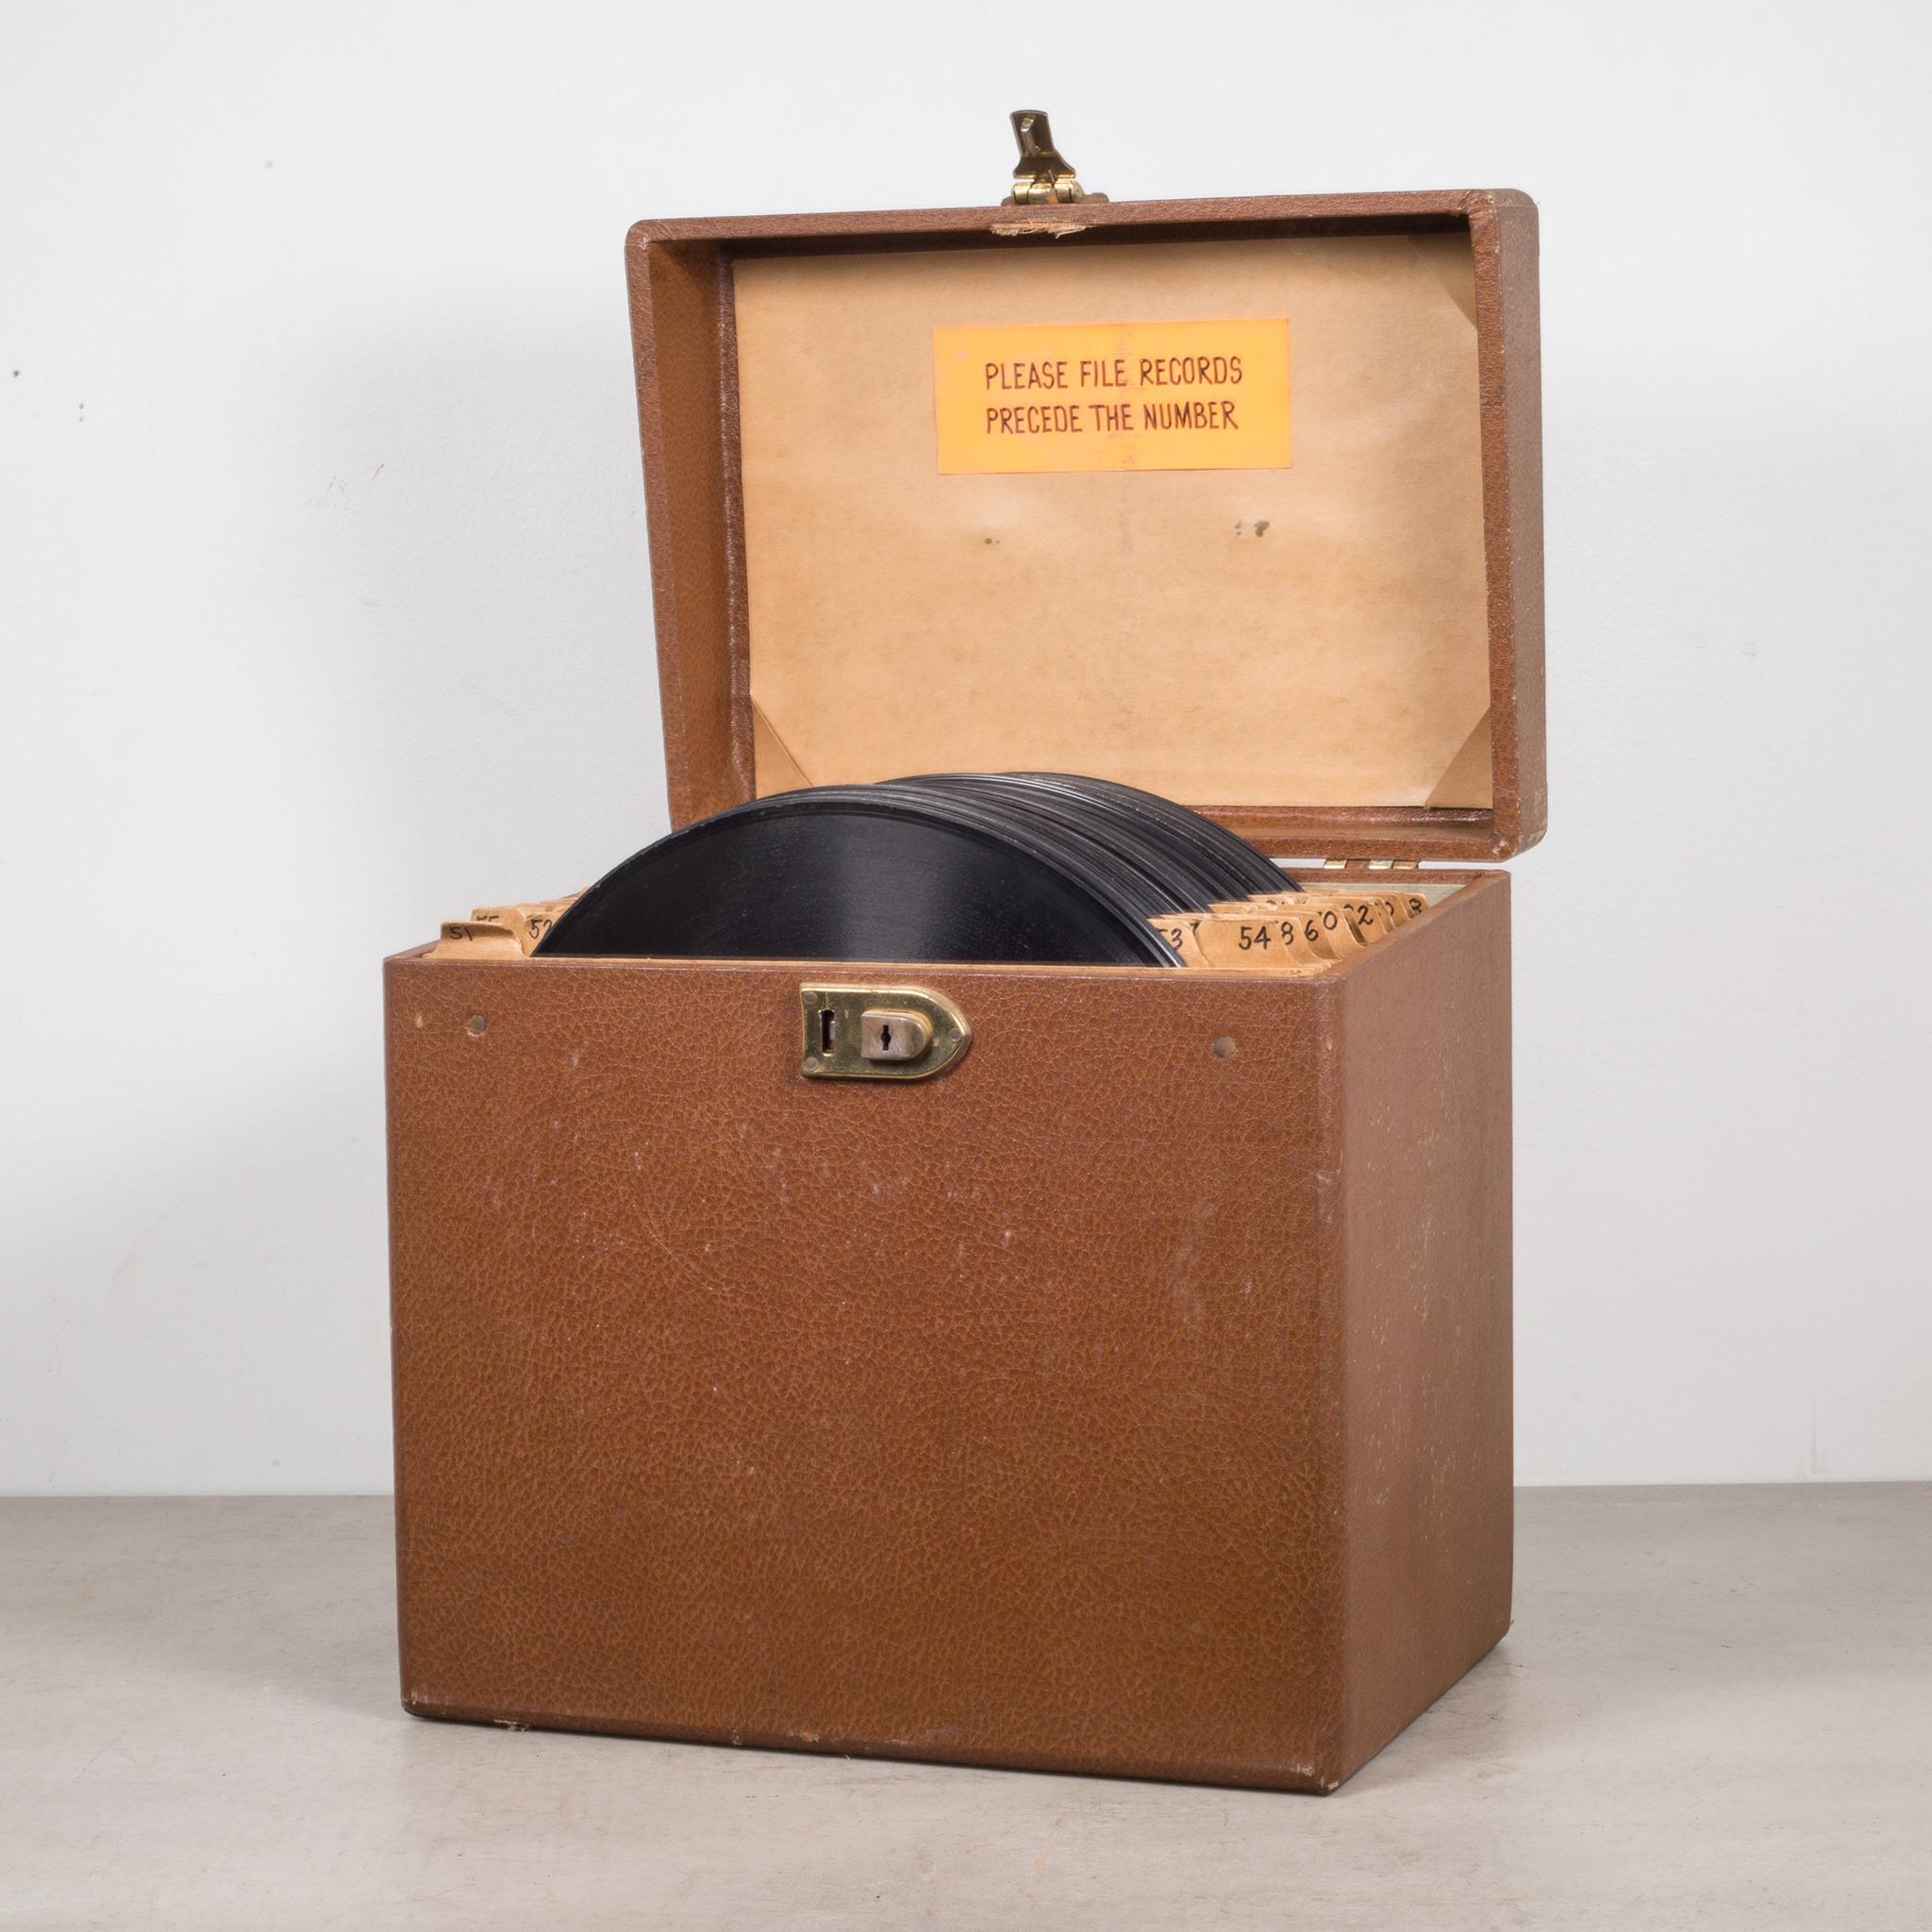 About:

A collection of vintage records in the original travel case. Record labels include Decca, RCA Victor, Columbia, Essex Records and Capitol Records of various artists such as Eddie Fisher, Benny Goodman and his Orchestra, Rosemary Clooney,